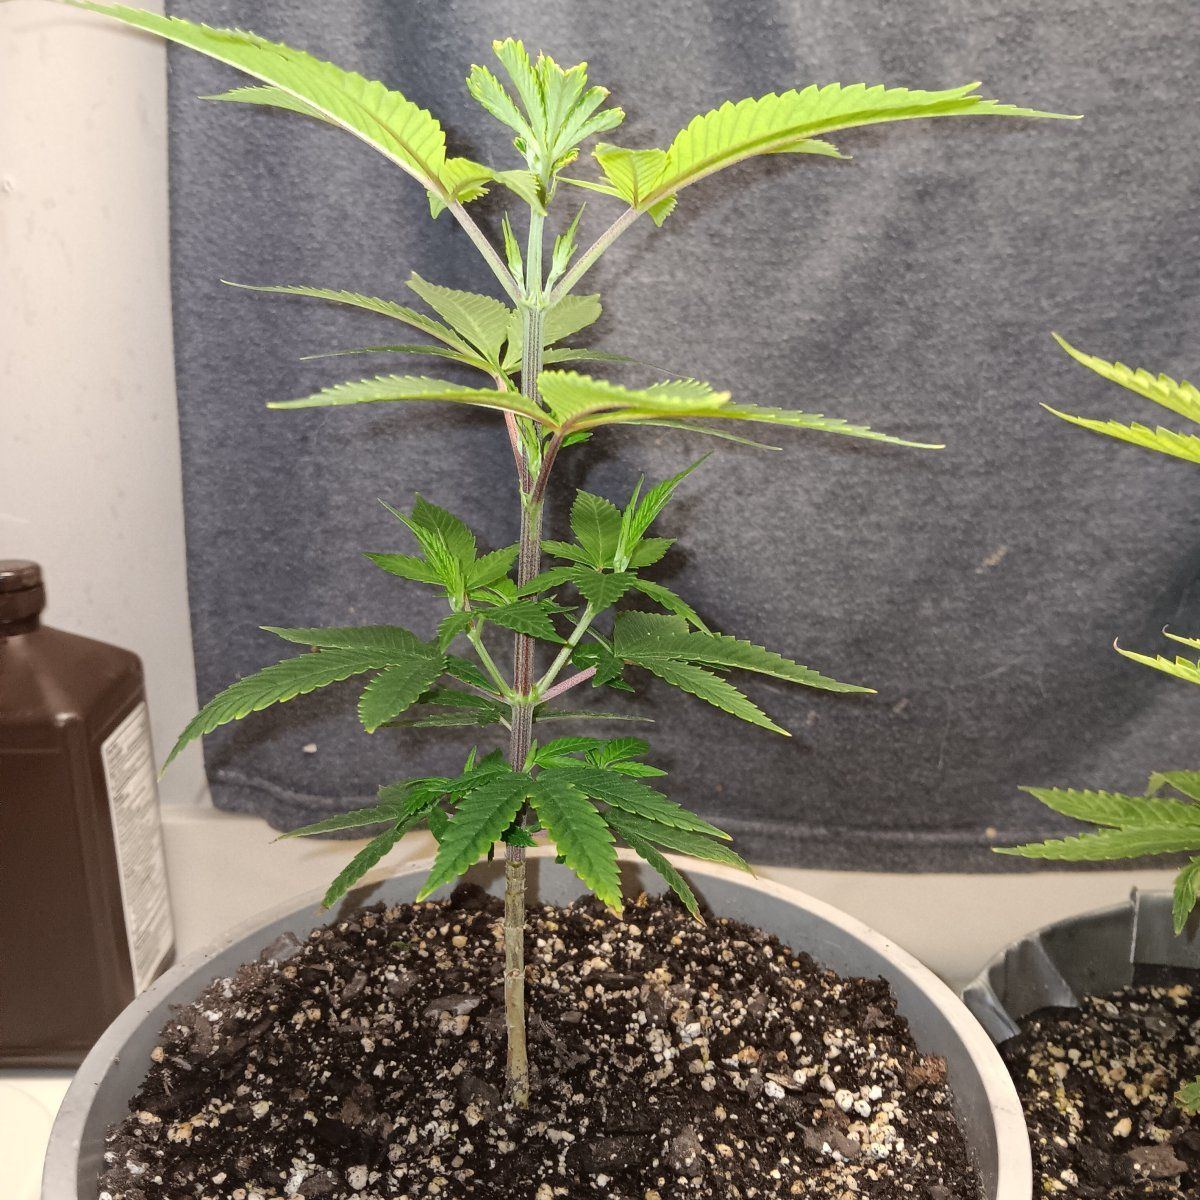 Any help would be appreciated new grower here having a color issue with one plant being too li 2